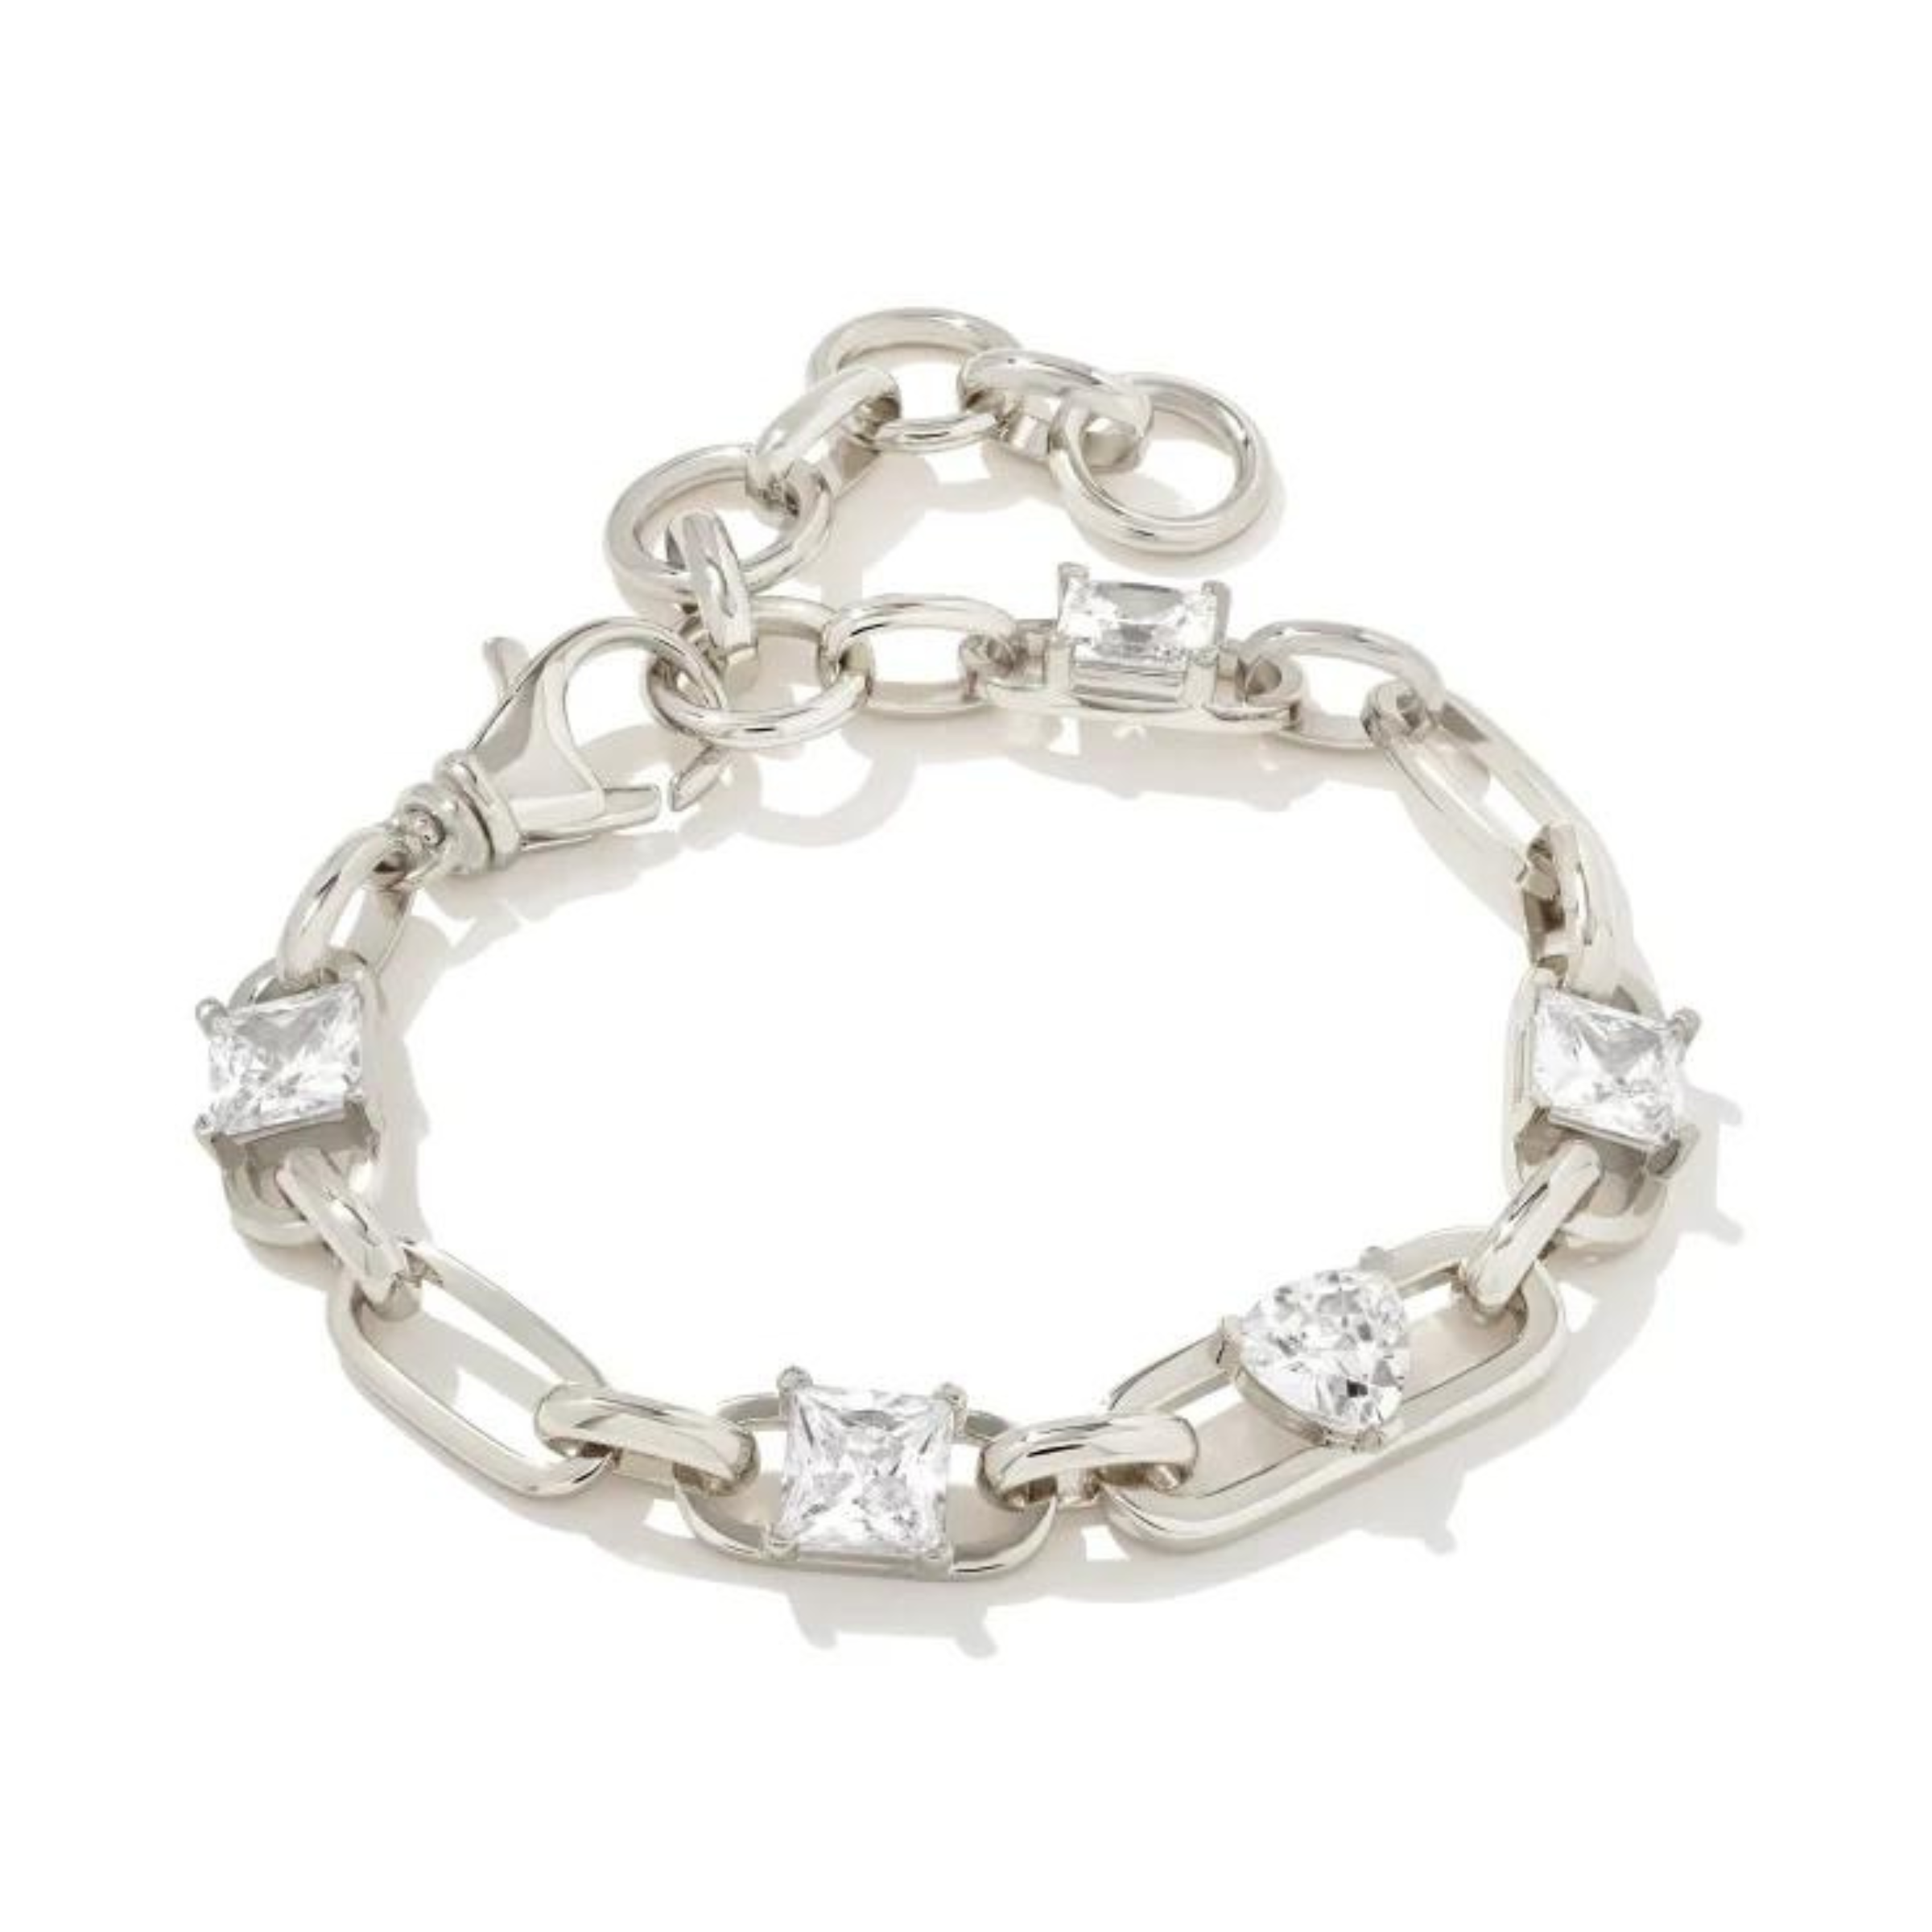 Silver chain bracelet with five clear crystals in different shapes. This bracelet is pictured on a white background. 